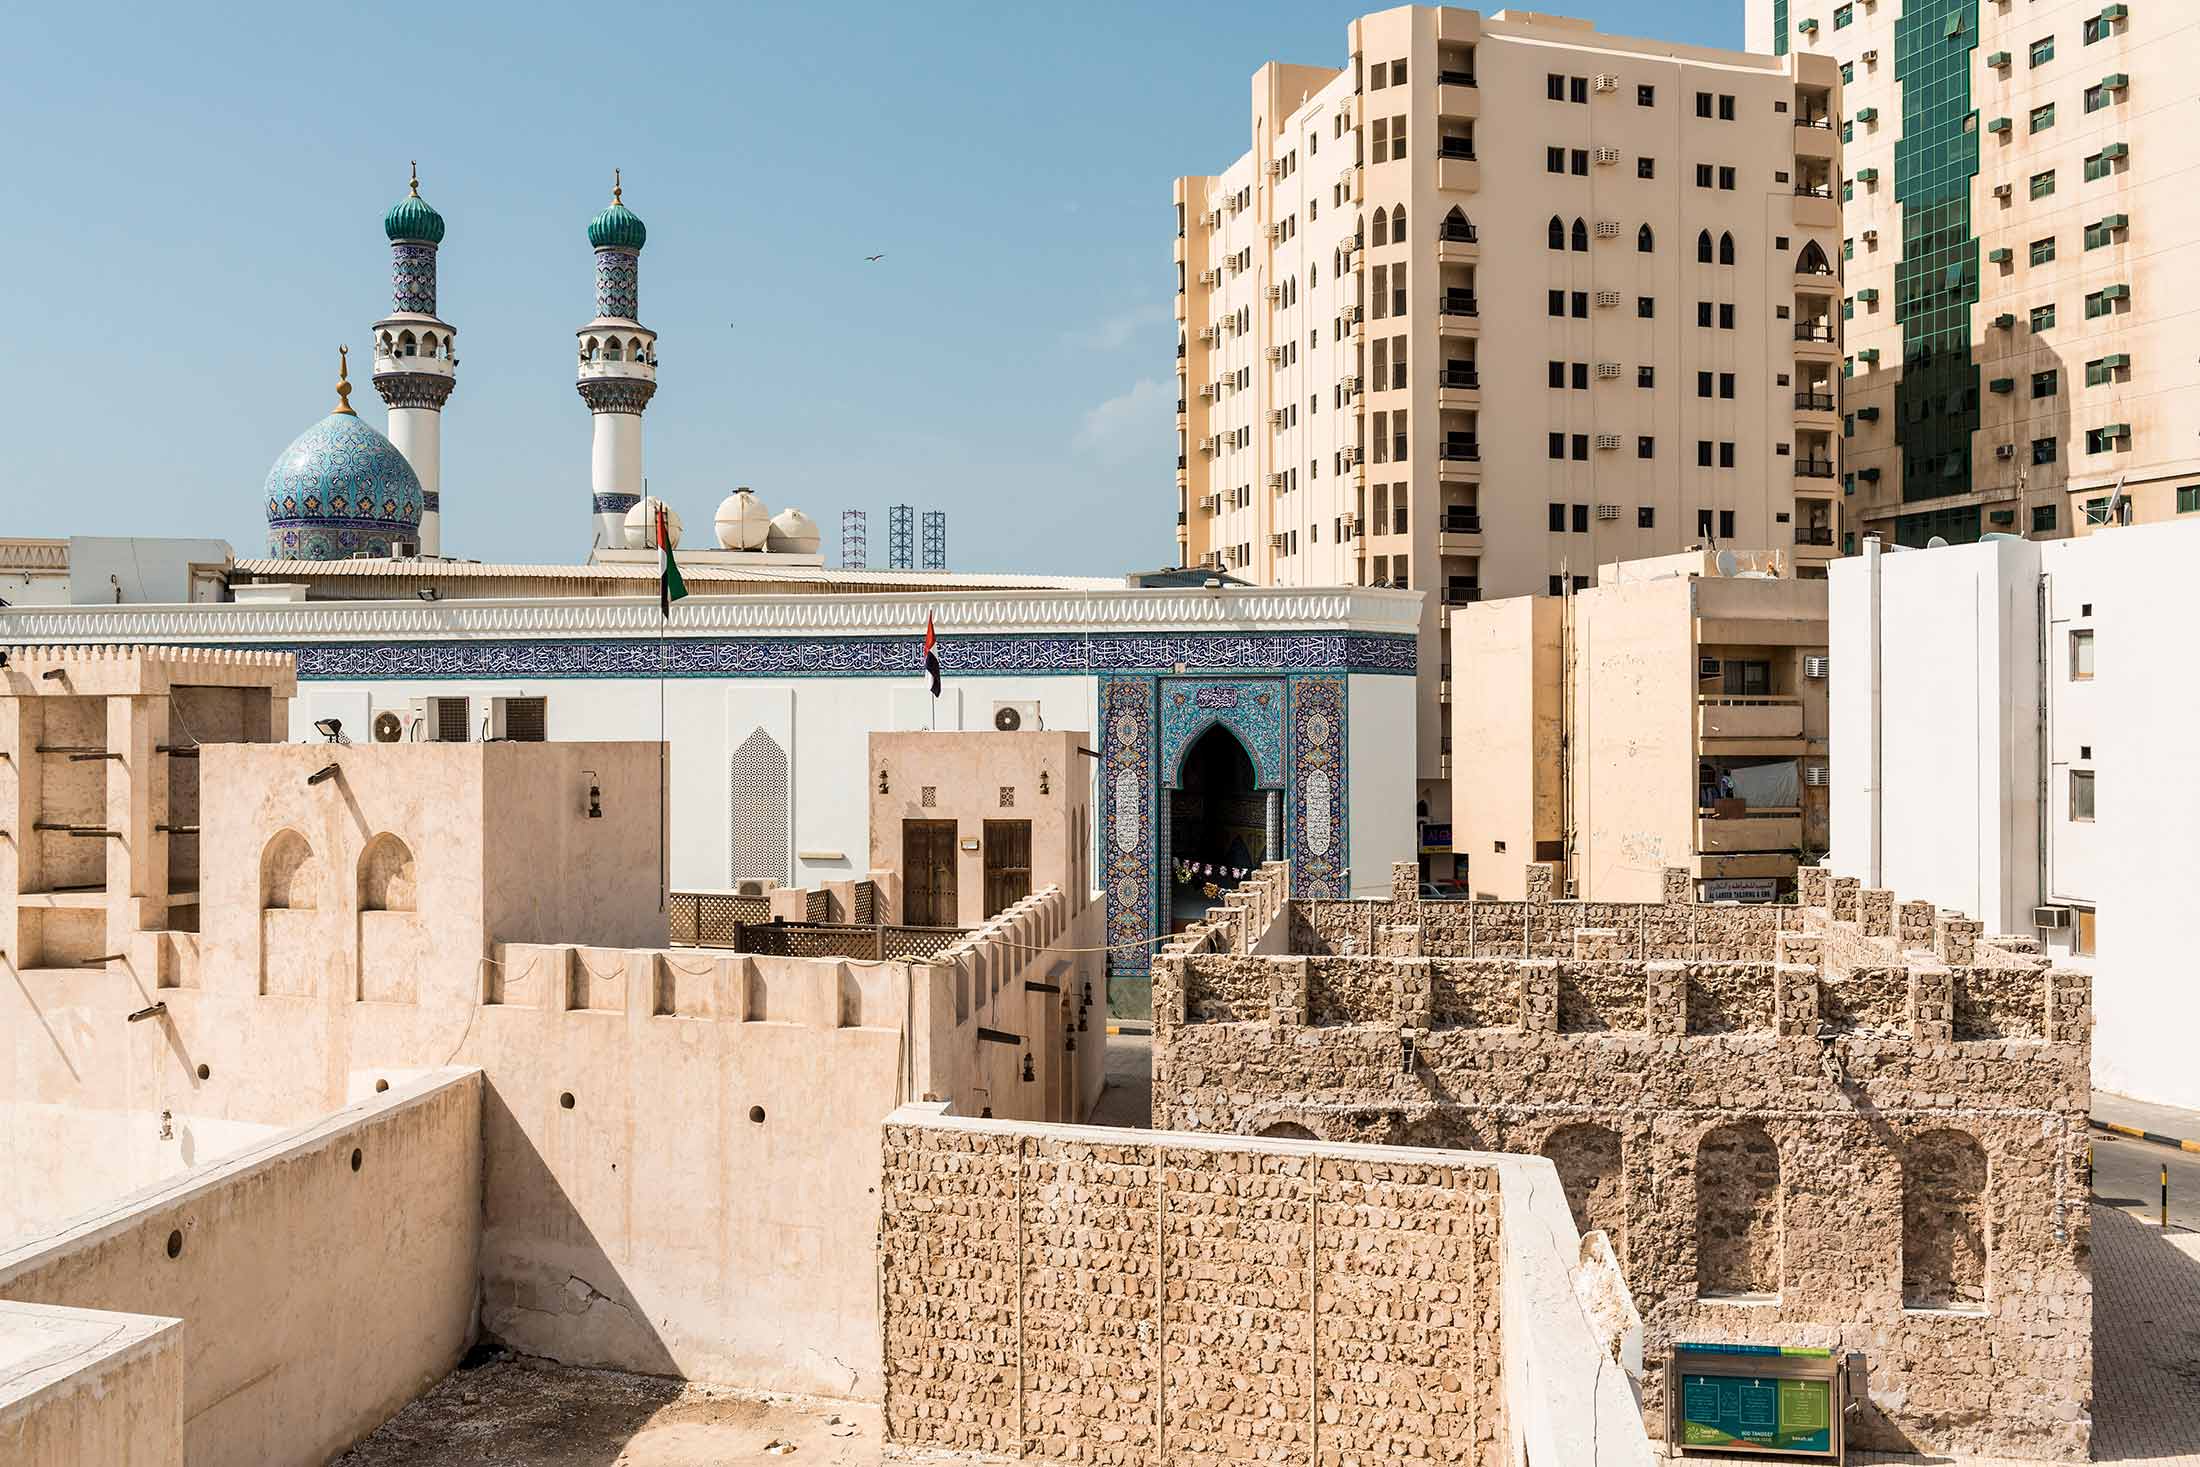 Early 19th century buildings made of bricks hewed from coral in the historic district of the United Arab Emirates’ Sharjah.